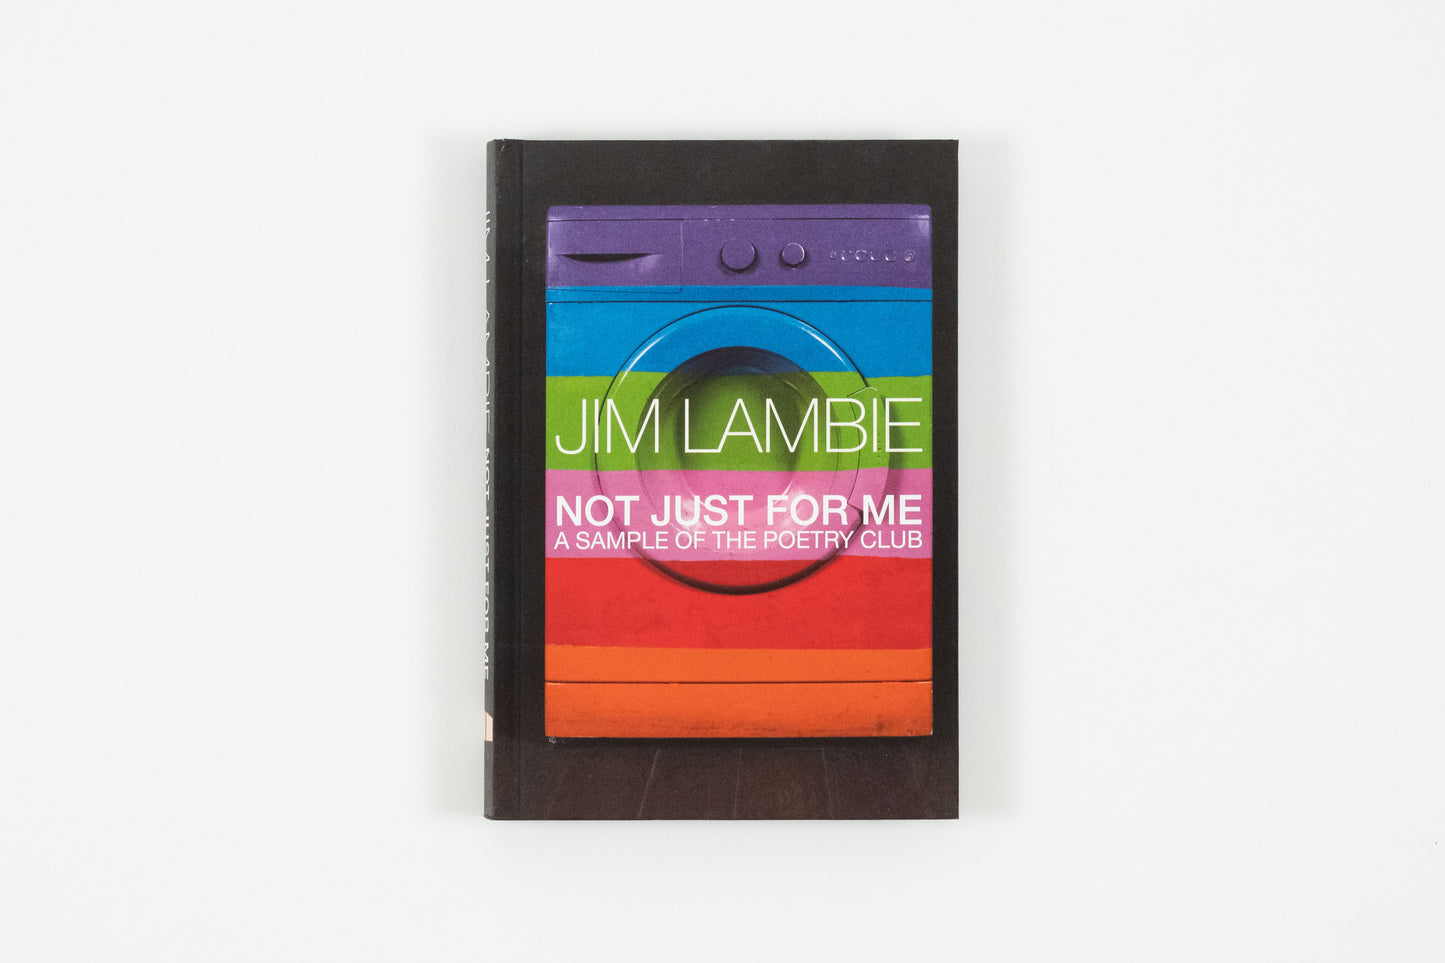 Jim Lambie - Not Just For Me: A Sample of The Poetry Club